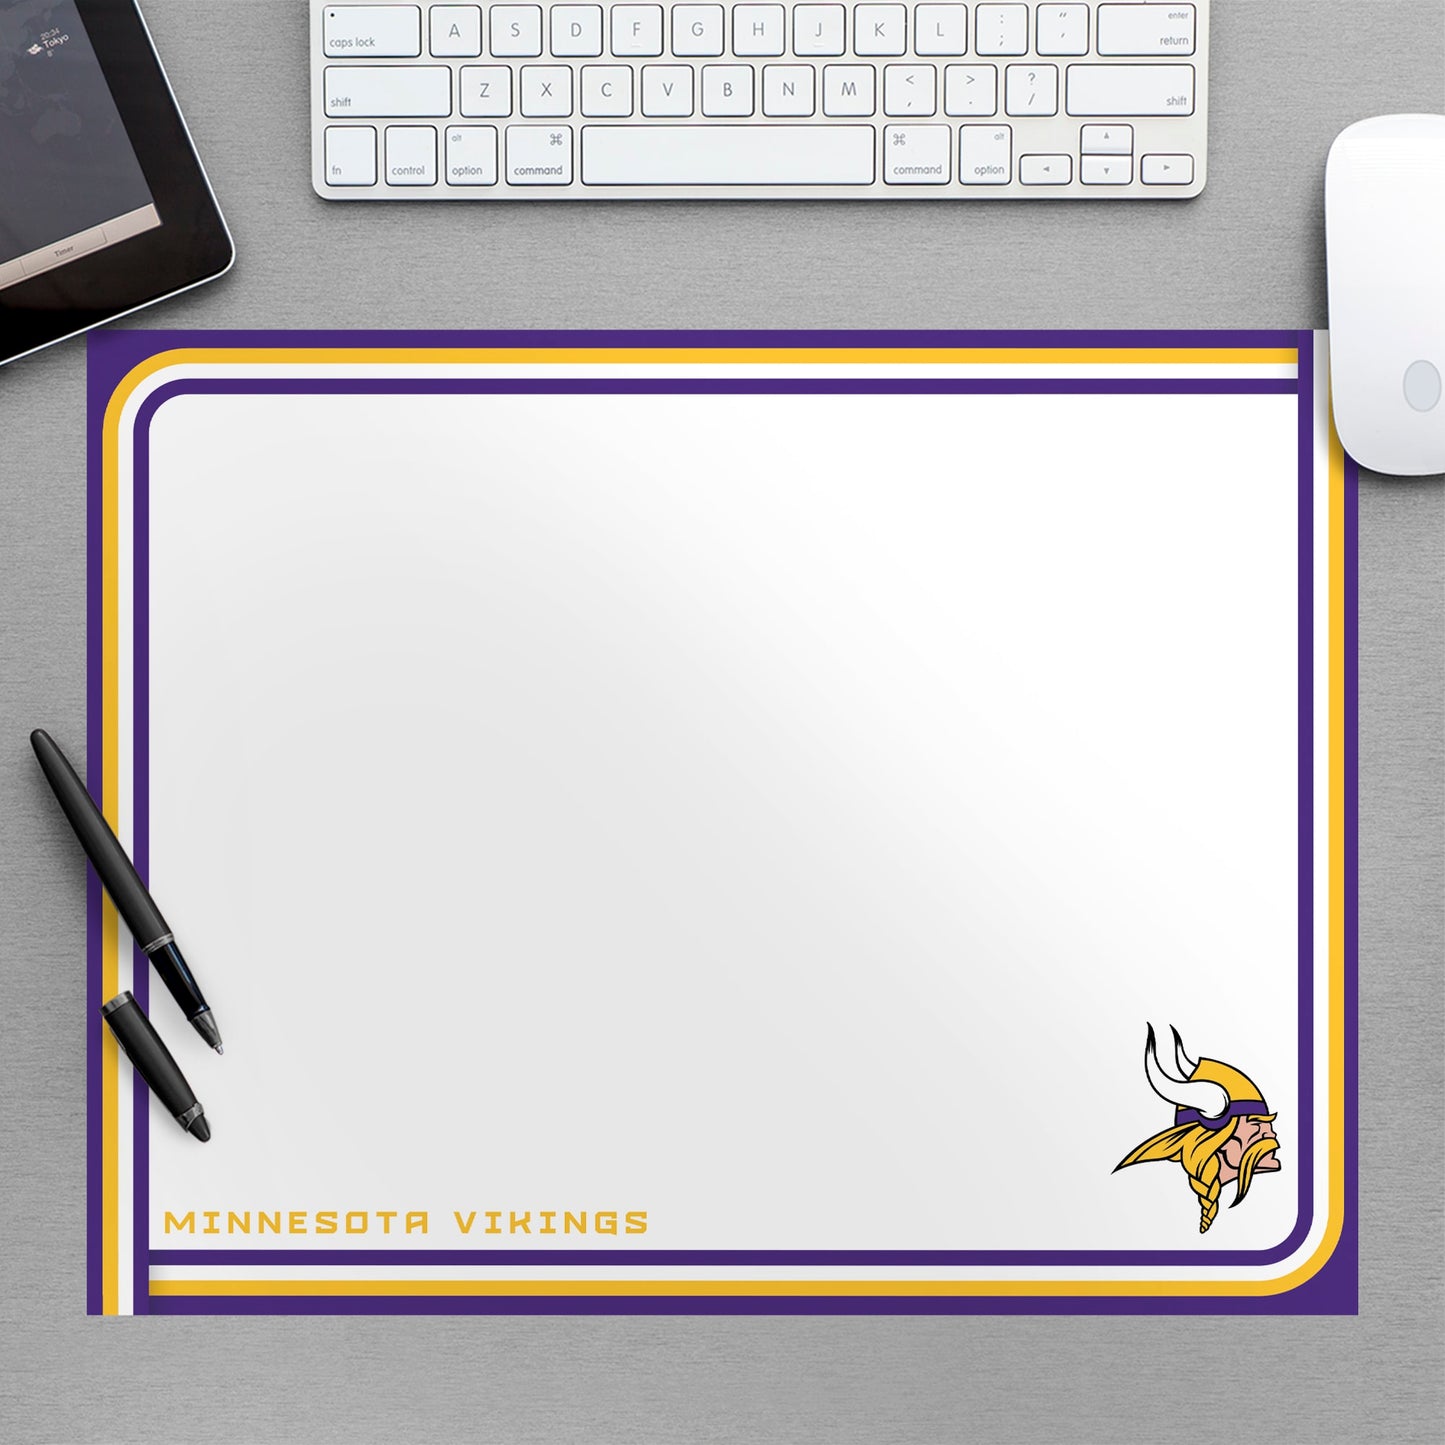 Minnesota Vikings:  Dry Erase Whiteboard        - Officially Licensed NFL Removable Wall   Adhesive Decal